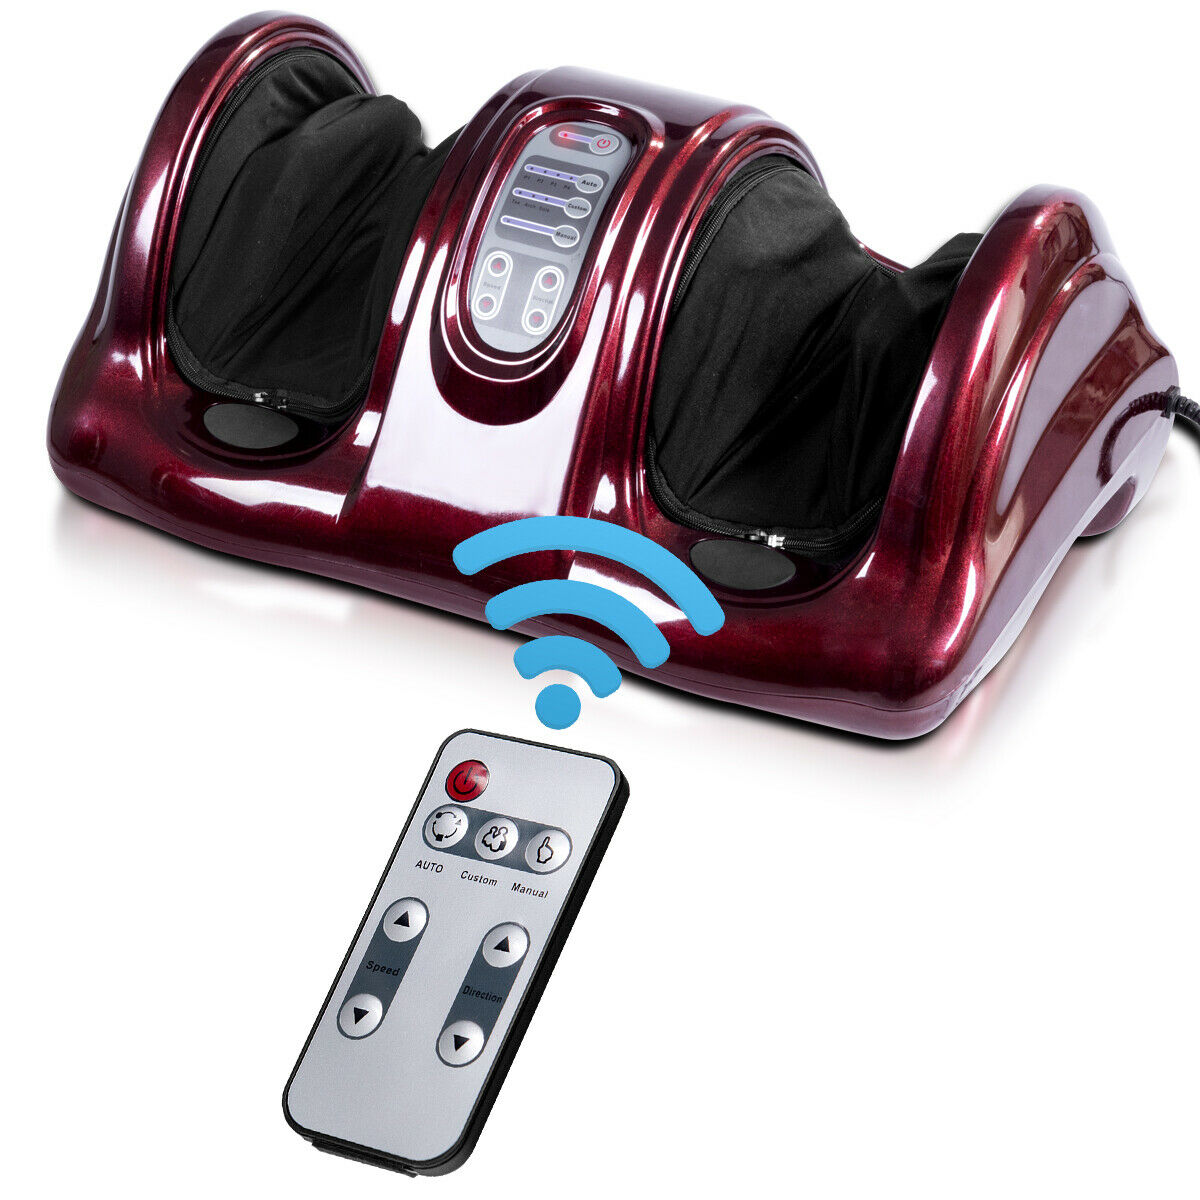 Costway Shiatsu Foot Massager Kneading and Rolling Leg Calf Ankle with Remote Burgundy